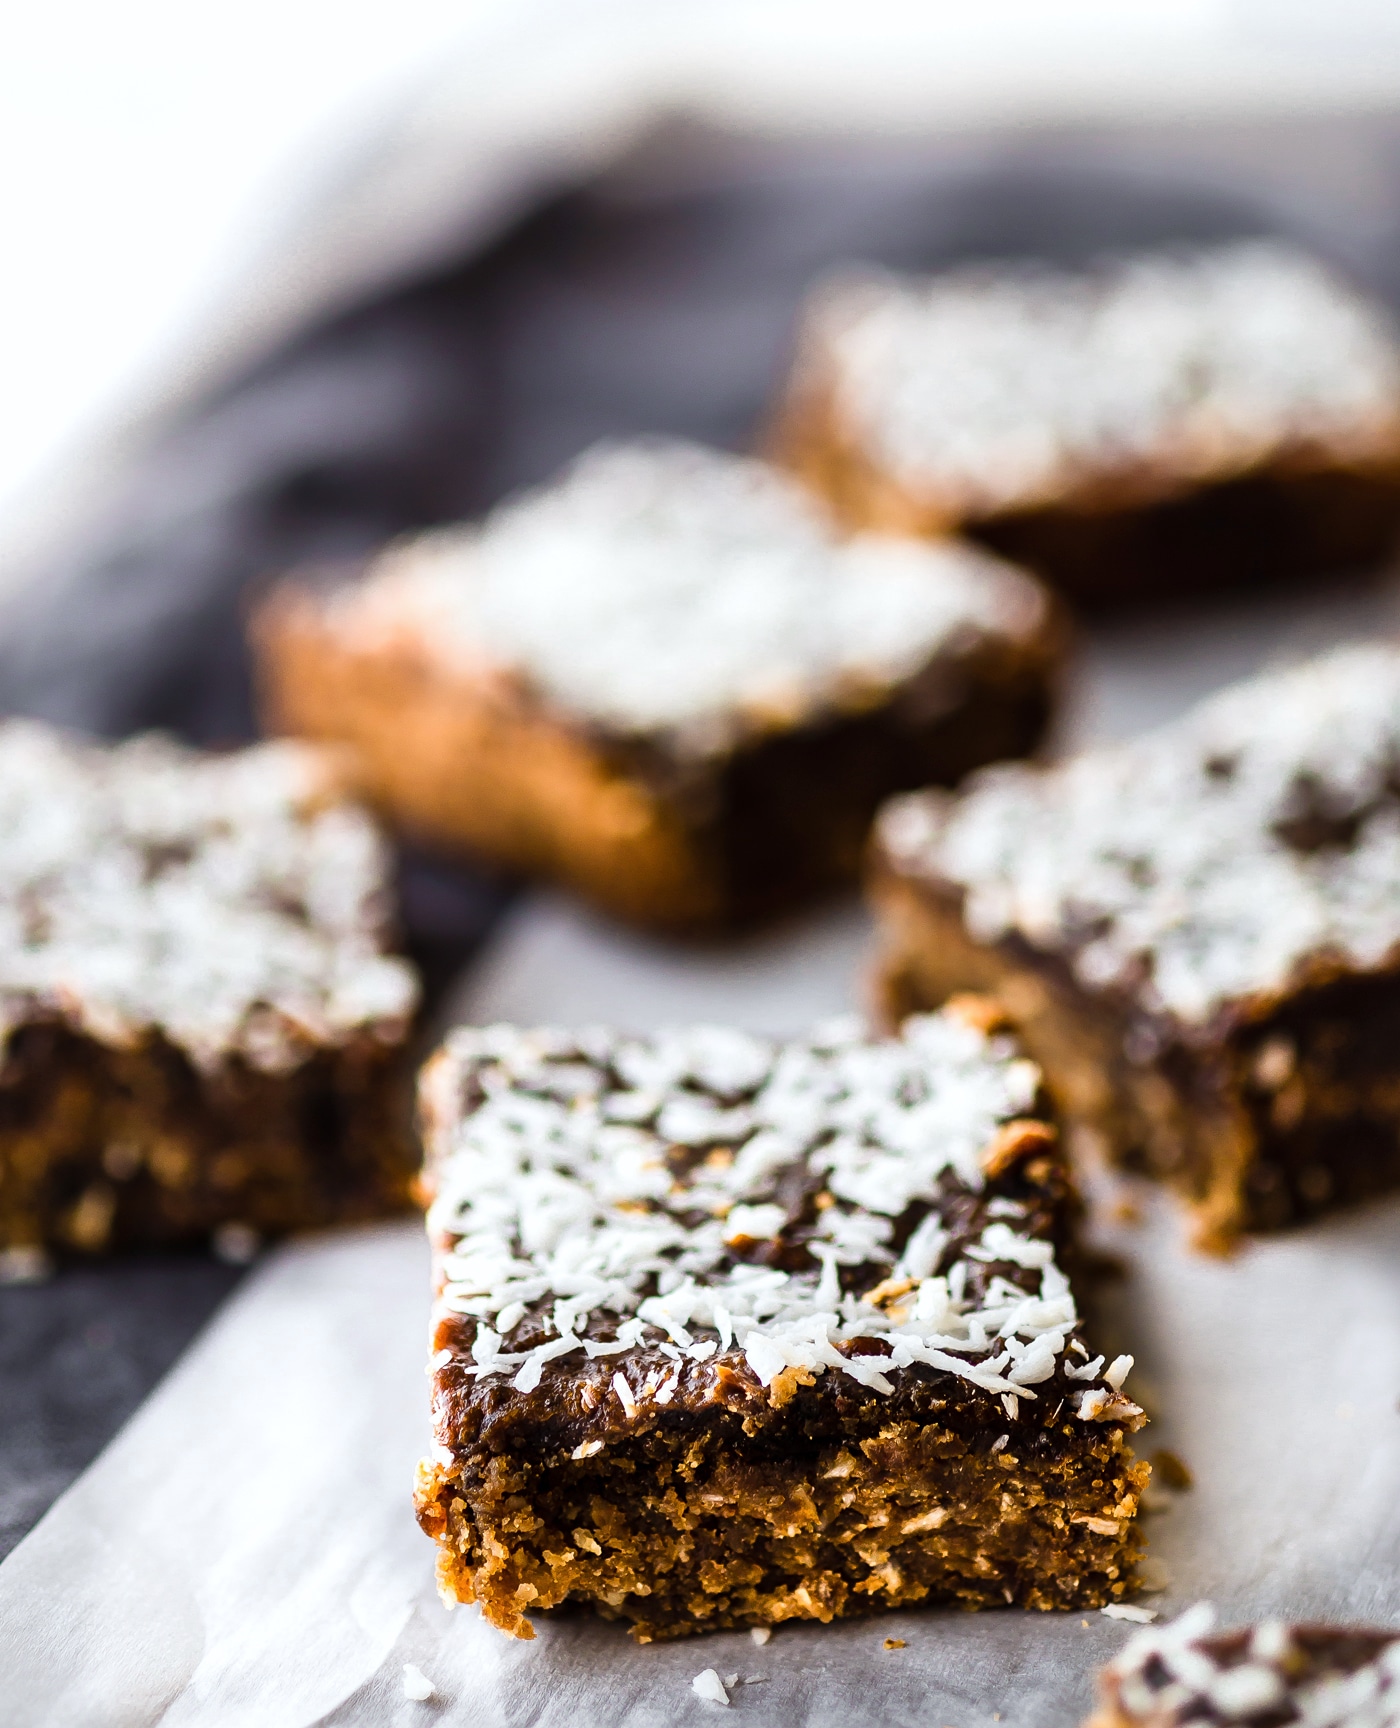 These Paleo Almond Butter Jelly Energy Bars are one of our favorite bars that fuel us for workouts and snacking on the go. Made with few ingredients; no oils and no refined sugar. Blended and Baked in just 30 minutes, Which makes them pretty amazing! So chewy and flavorful that you'd never know they were healthy. Freezer friendly.